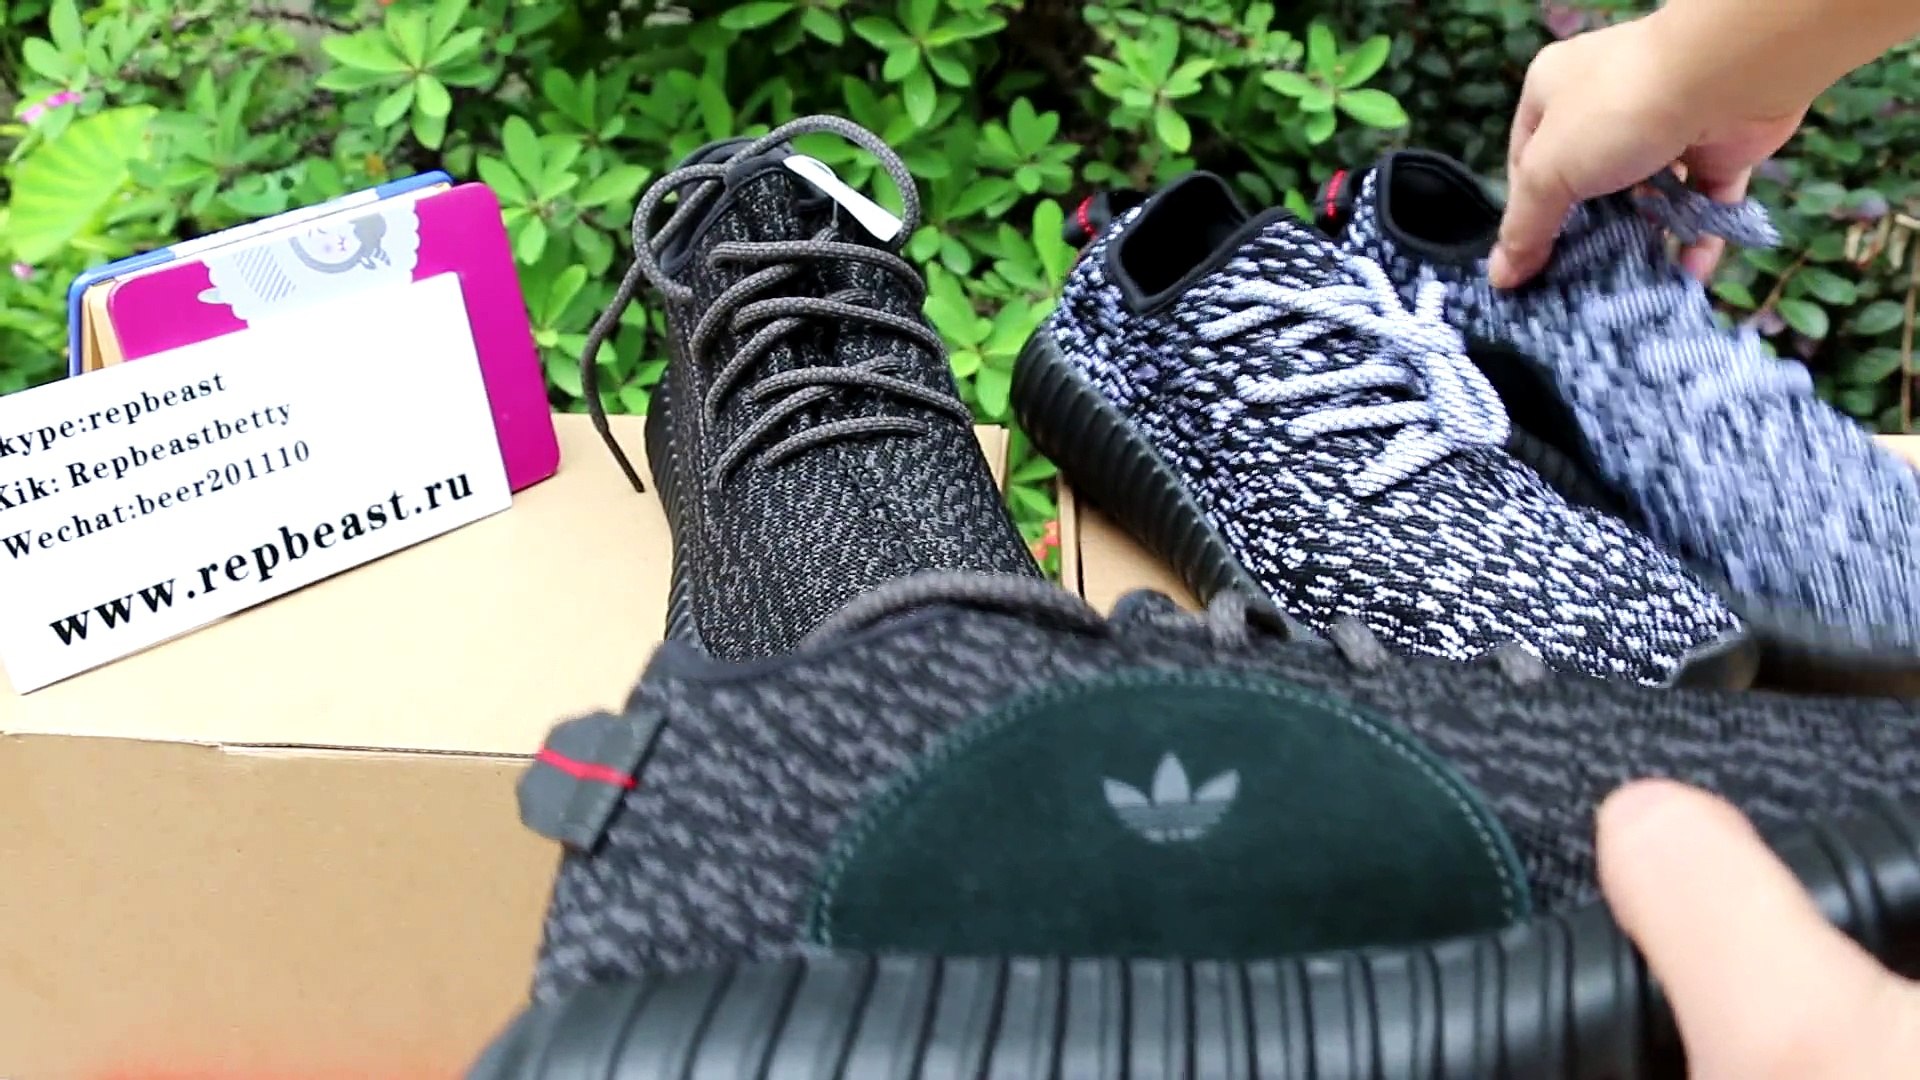 Comparision for original and fake yeezy 350 "pirate black" from Repbeast.ru  - video Dailymotion